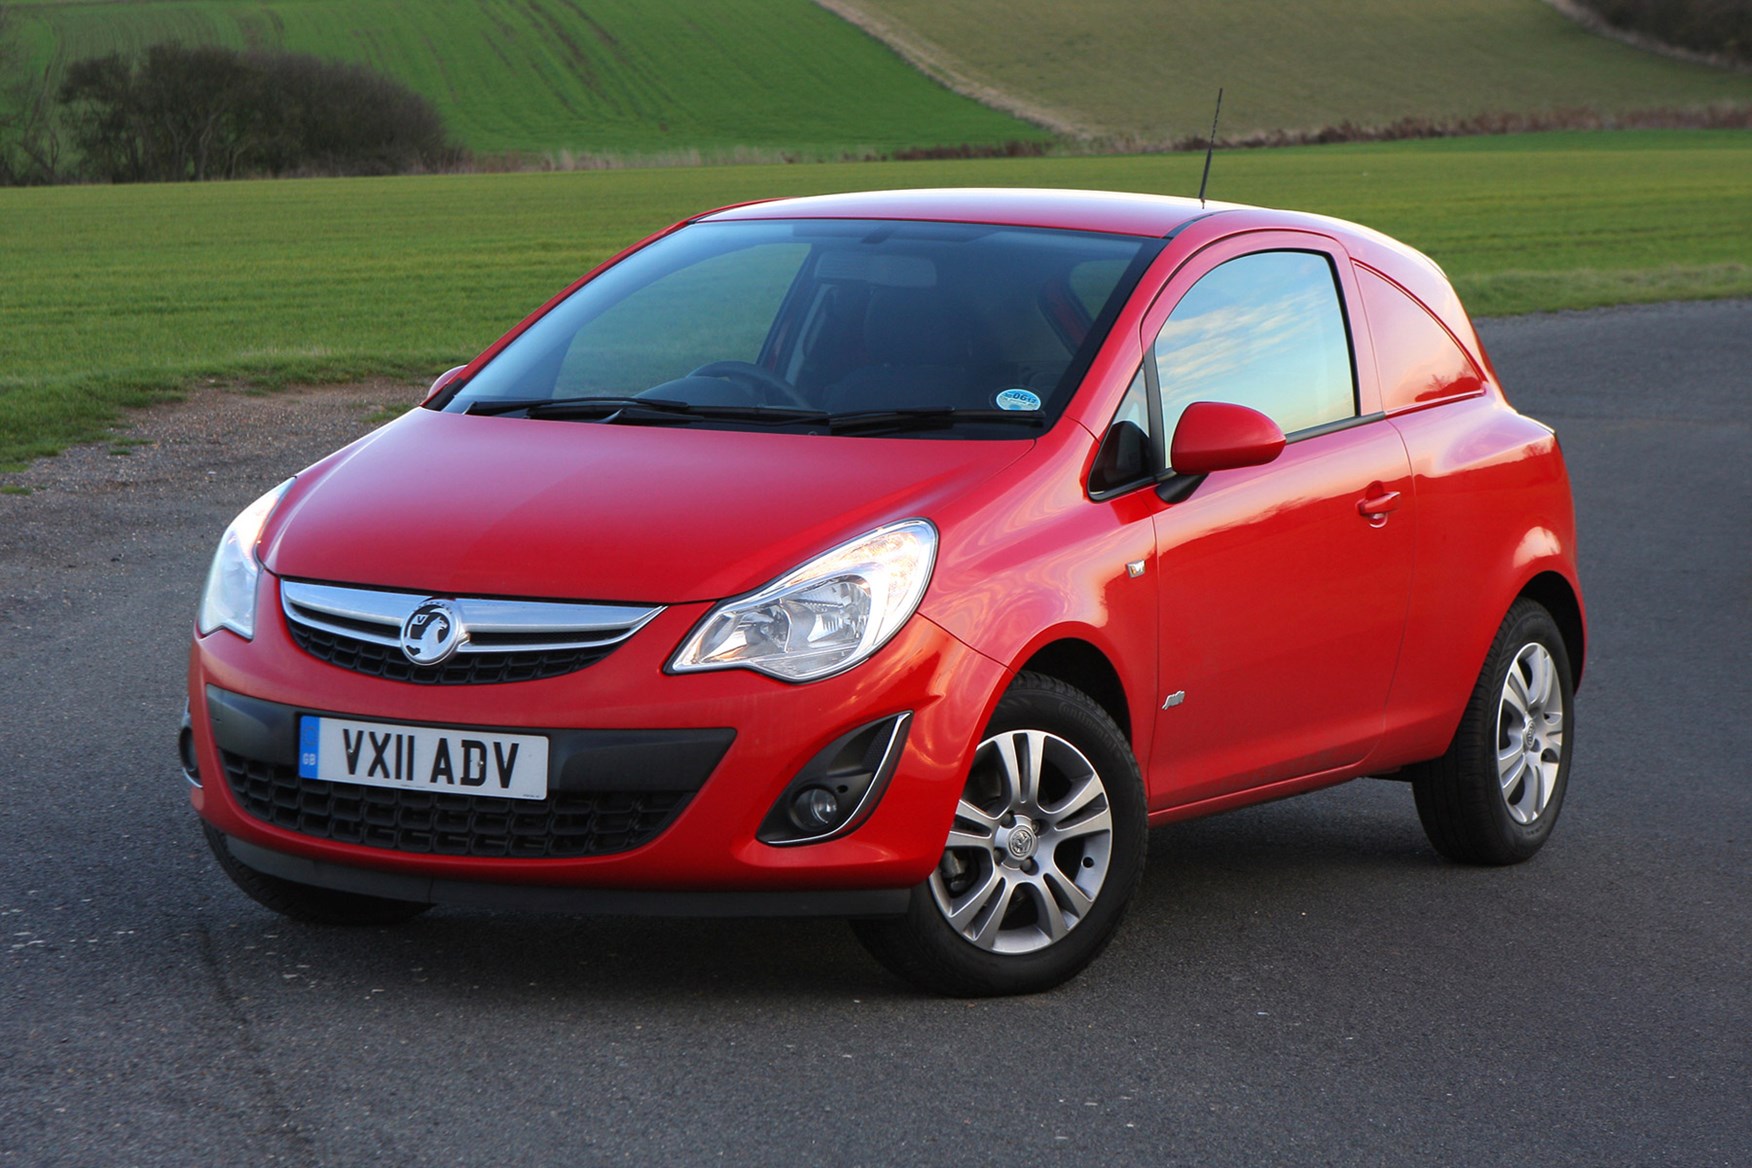 Vauxhall Corsa review on Parkers Vans - front exterior